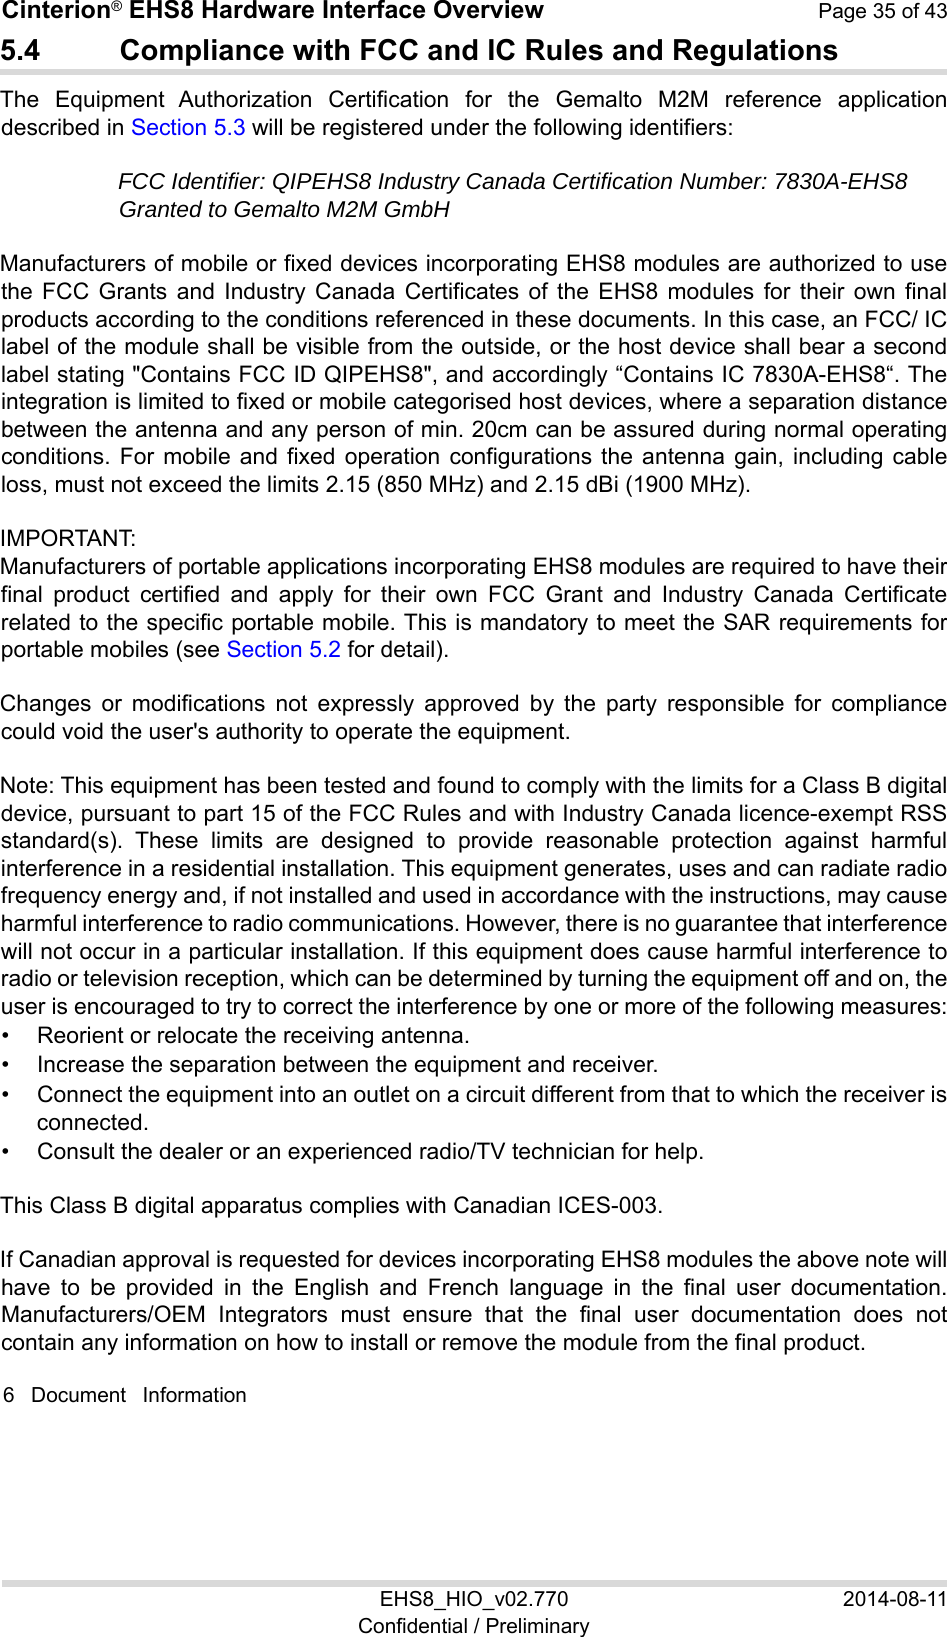 Cinterion® EHS8 Hardware Interface Overview  Page 35 of 43 EHS8_HIO_v02.770  2014-08-11 Confidential / Preliminary 5.4  Compliance with FCC and IC Rules and Regulations The  Equipment  Authorization  Certification  for  the  Gemalto  M2M  reference  application described in Section 5.3 will be registered under the following identifiers: FCC Identifier: QIPEHS8 Industry Canada Certification Number: 7830A-EHS8 Granted to Gemalto M2M GmbH  Manufacturers of mobile or fixed devices incorporating EHS8 modules are authorized to use the  FCC  Grants  and  Industry  Canada  Certificates of  the  EHS8  modules  for  their own  final products according to the conditions referenced in these documents. In this case, an FCC/ IC label of the module shall be visible from the outside, or the host device shall bear a second label stating &quot;Contains FCC ID QIPEHS8&quot;, and accordingly “Contains IC 7830A-EHS8“. The integration is limited to fixed or mobile categorised host devices, where a separation distance between the antenna and any person of min. 20cm can be assured during normal operating conditions.  For  mobile  and  fixed  operation  configurations the  antenna  gain,  including  cable loss, must not exceed the limits 2.15 (850 MHz) and 2.15 dBi (1900 MHz). IMPORTANT:  Manufacturers of portable applications incorporating EHS8 modules are required to have their final  product  certified  and  apply  for  their  own  FCC  Grant  and  Industry  Canada  Certificate related to the specific portable mobile. This is mandatory to meet the SAR requirements for portable mobiles (see Section 5.2 for detail). Changes  or  modifications  not  expressly  approved  by  the  party  responsible  for  compliance could void the user&apos;s authority to operate the equipment. Note: This equipment has been tested and found to comply with the limits for a Class B digital device, pursuant to part 15 of the FCC Rules and with Industry Canada licence-exempt RSS standard(s).  These  limits  are  designed  to  provide  reasonable  protection  against  harmful interference in a residential installation. This equipment generates, uses and can radiate radio frequency energy and, if not installed and used in accordance with the instructions, may cause harmful interference to radio communications. However, there is no guarantee that interference will not occur in a particular installation. If this equipment does cause harmful interference to radio or television reception, which can be determined by turning the equipment off and on, the user is encouraged to try to correct the interference by one or more of the following measures:  •  Reorient or relocate the receiving antenna. •  Increase the separation between the equipment and receiver. •  Connect the equipment into an outlet on a circuit different from that to which the receiver is connected. •  Consult the dealer or an experienced radio/TV technician for help. This Class B digital apparatus complies with Canadian ICES-003. If Canadian approval is requested for devices incorporating EHS8 modules the above note will have  to  be  provided  in  the  English  and  French  language  in  the  final  user  documentation. Manufacturers/OEM  Integrators  must  ensure  that  the  final  user  documentation  does  not contain any information on how to install or remove the module from the final product. 6  Document  Information 39 